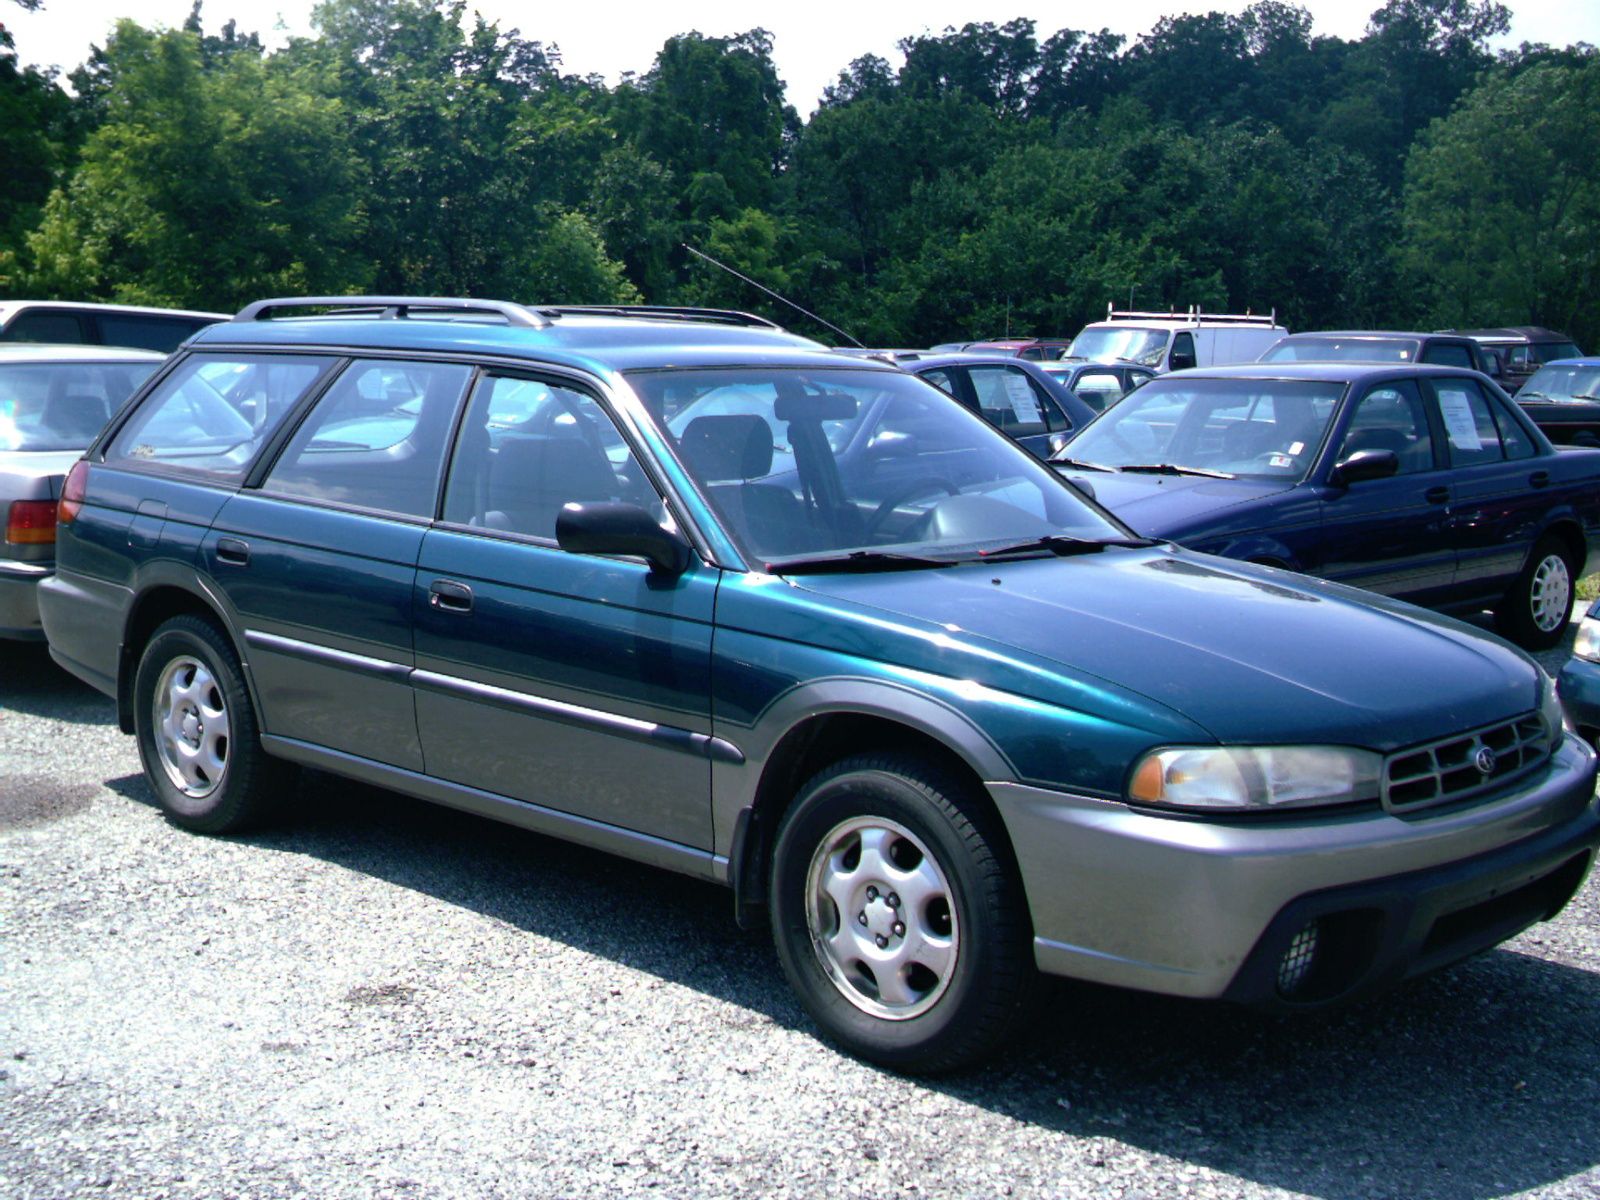 1996 Subaru Legacy LS 0-60 Times, Top Speed, Specs, Quarter Mile, and